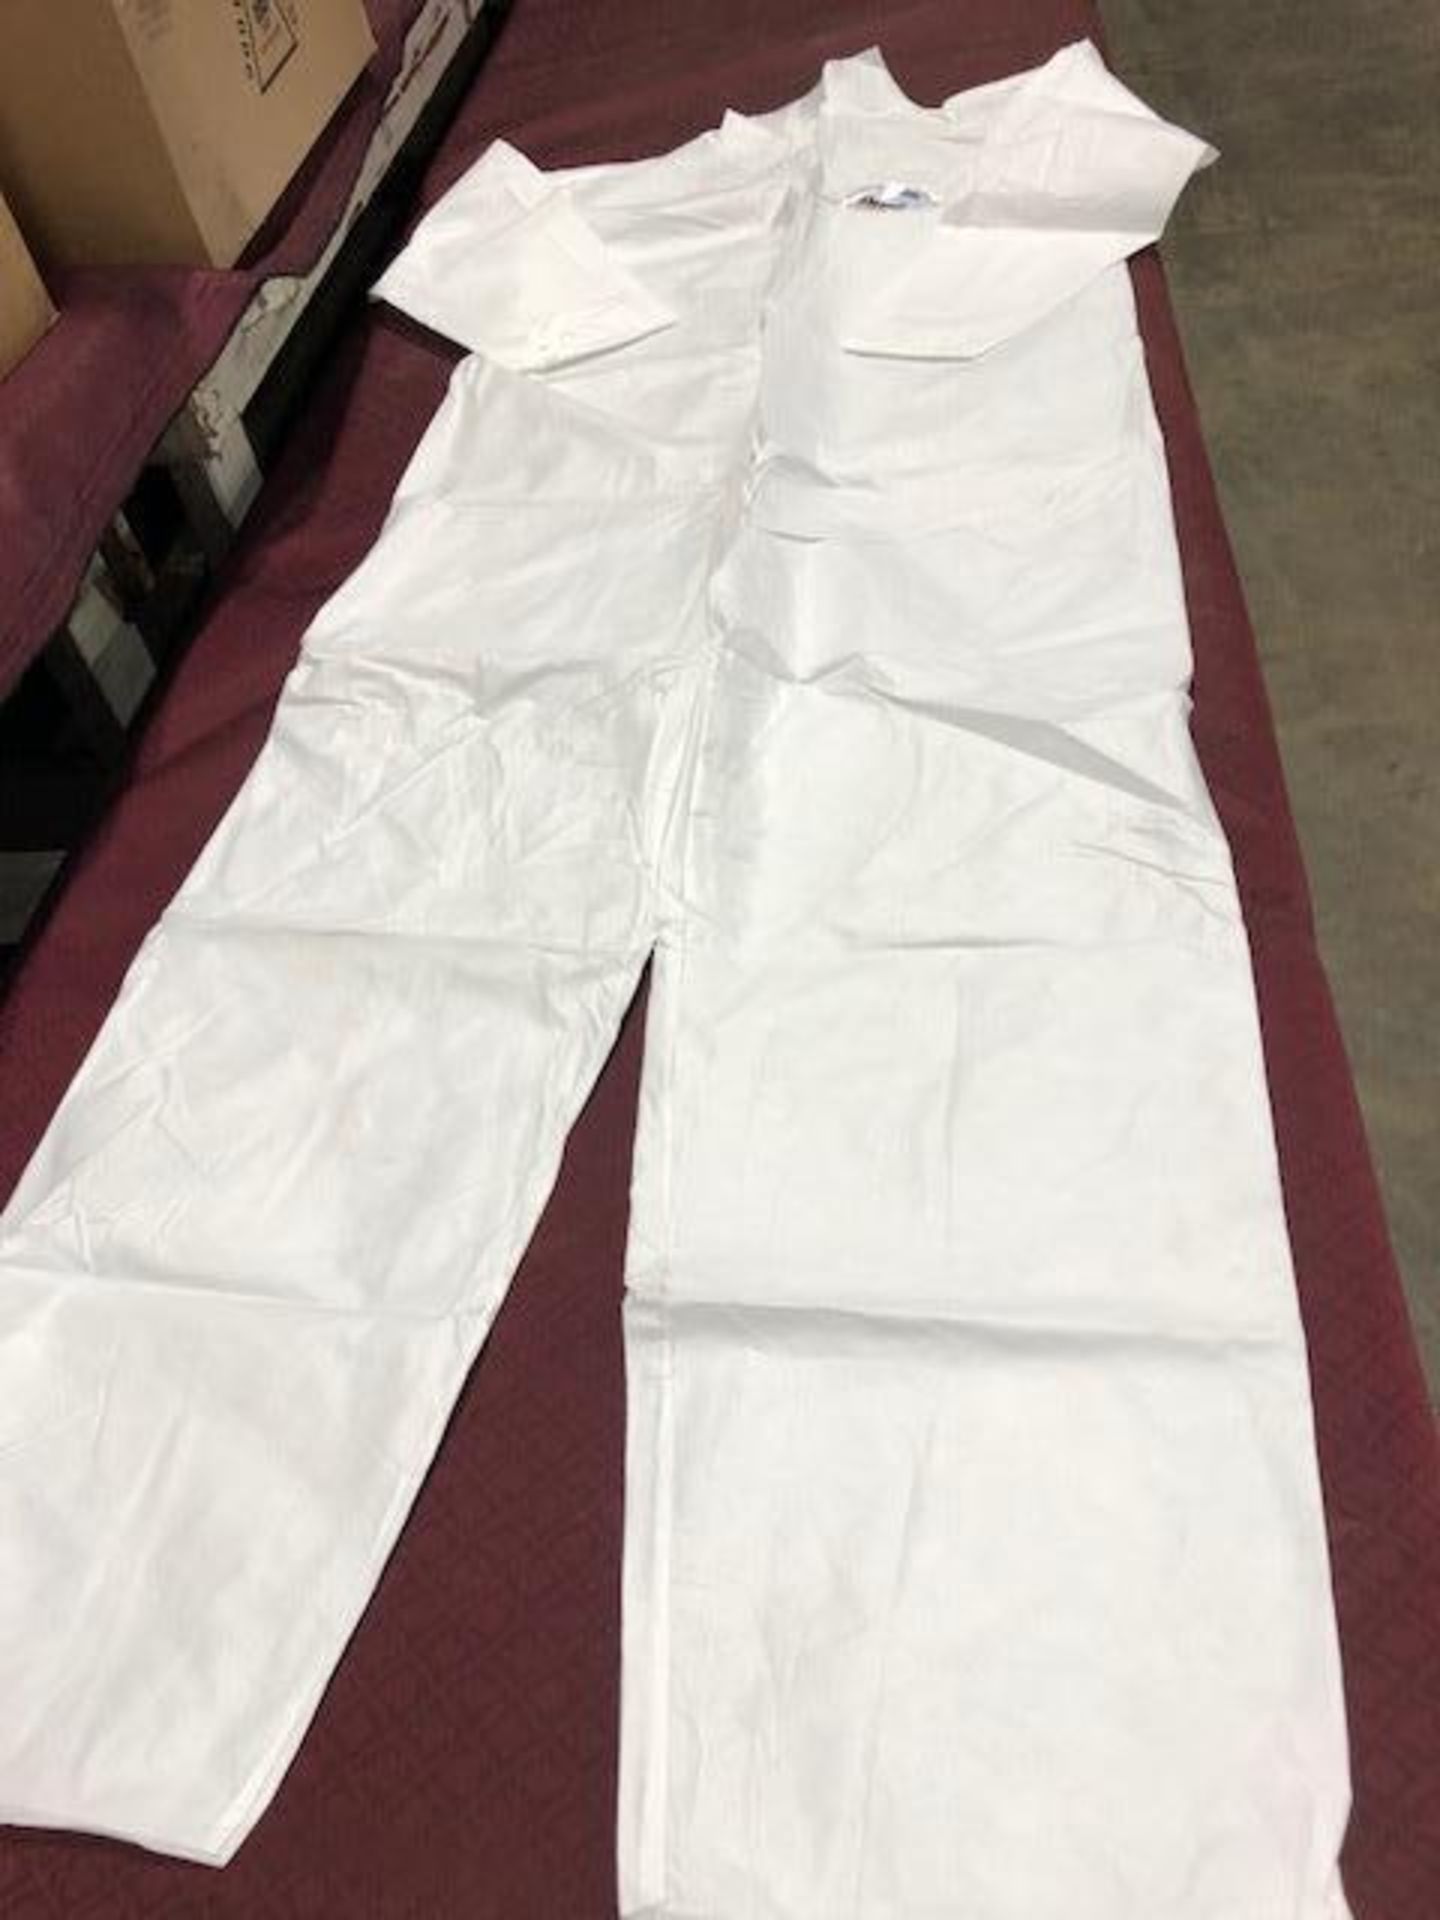 KleenGuard A35 Coverall paint suits. 25 suits per box - Image 2 of 3